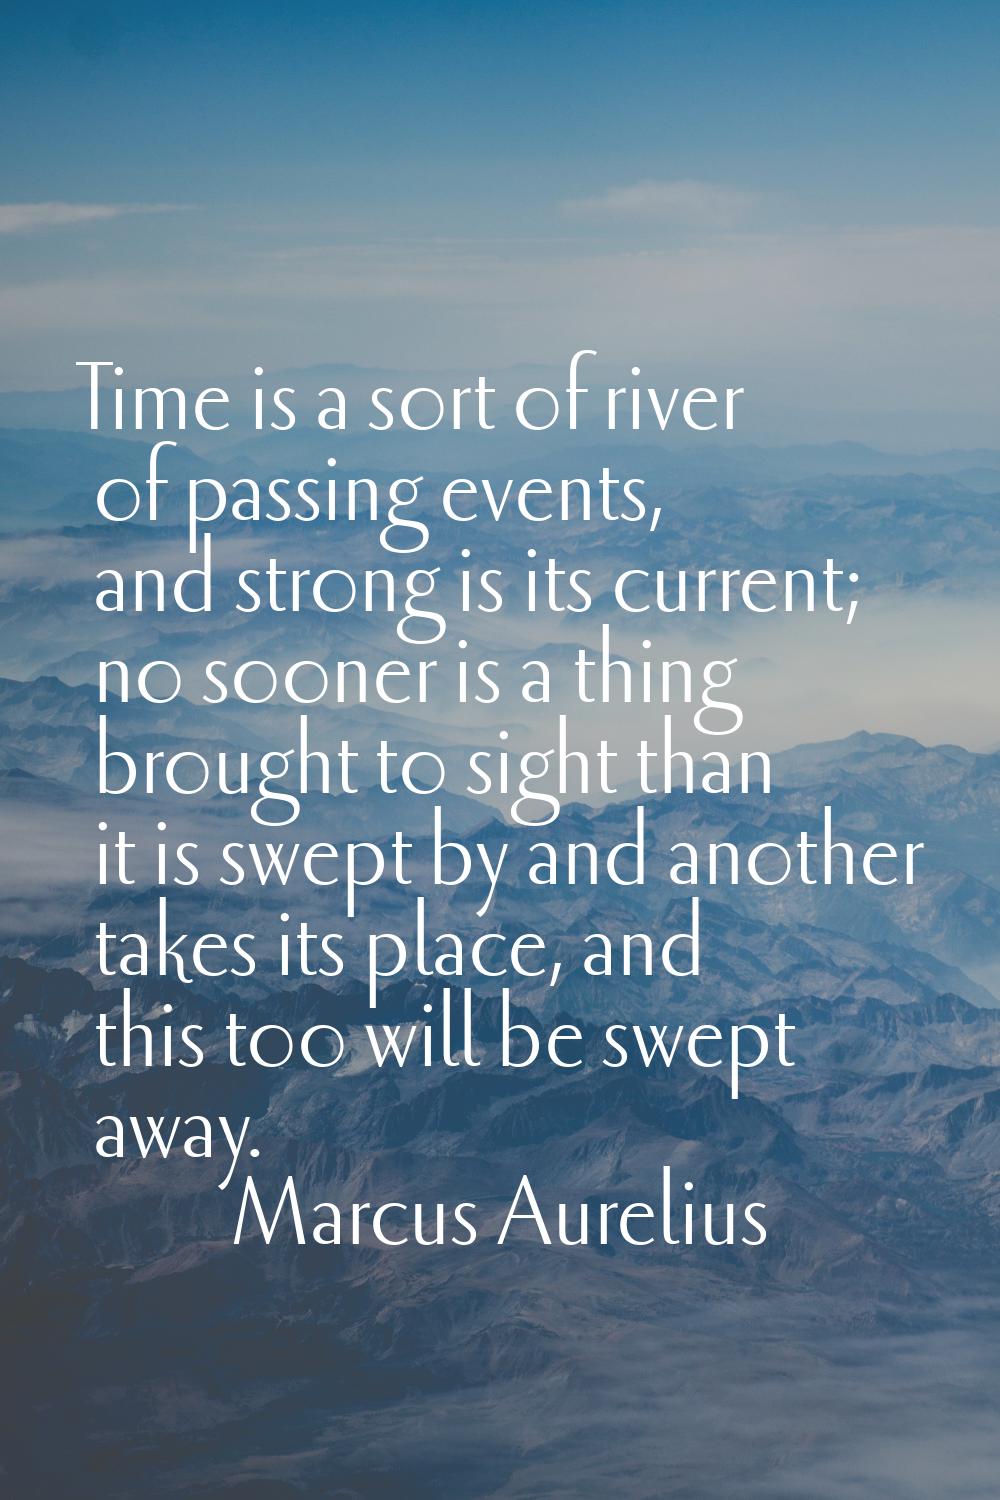 Time is a sort of river of passing events, and strong is its current; no sooner is a thing brought 